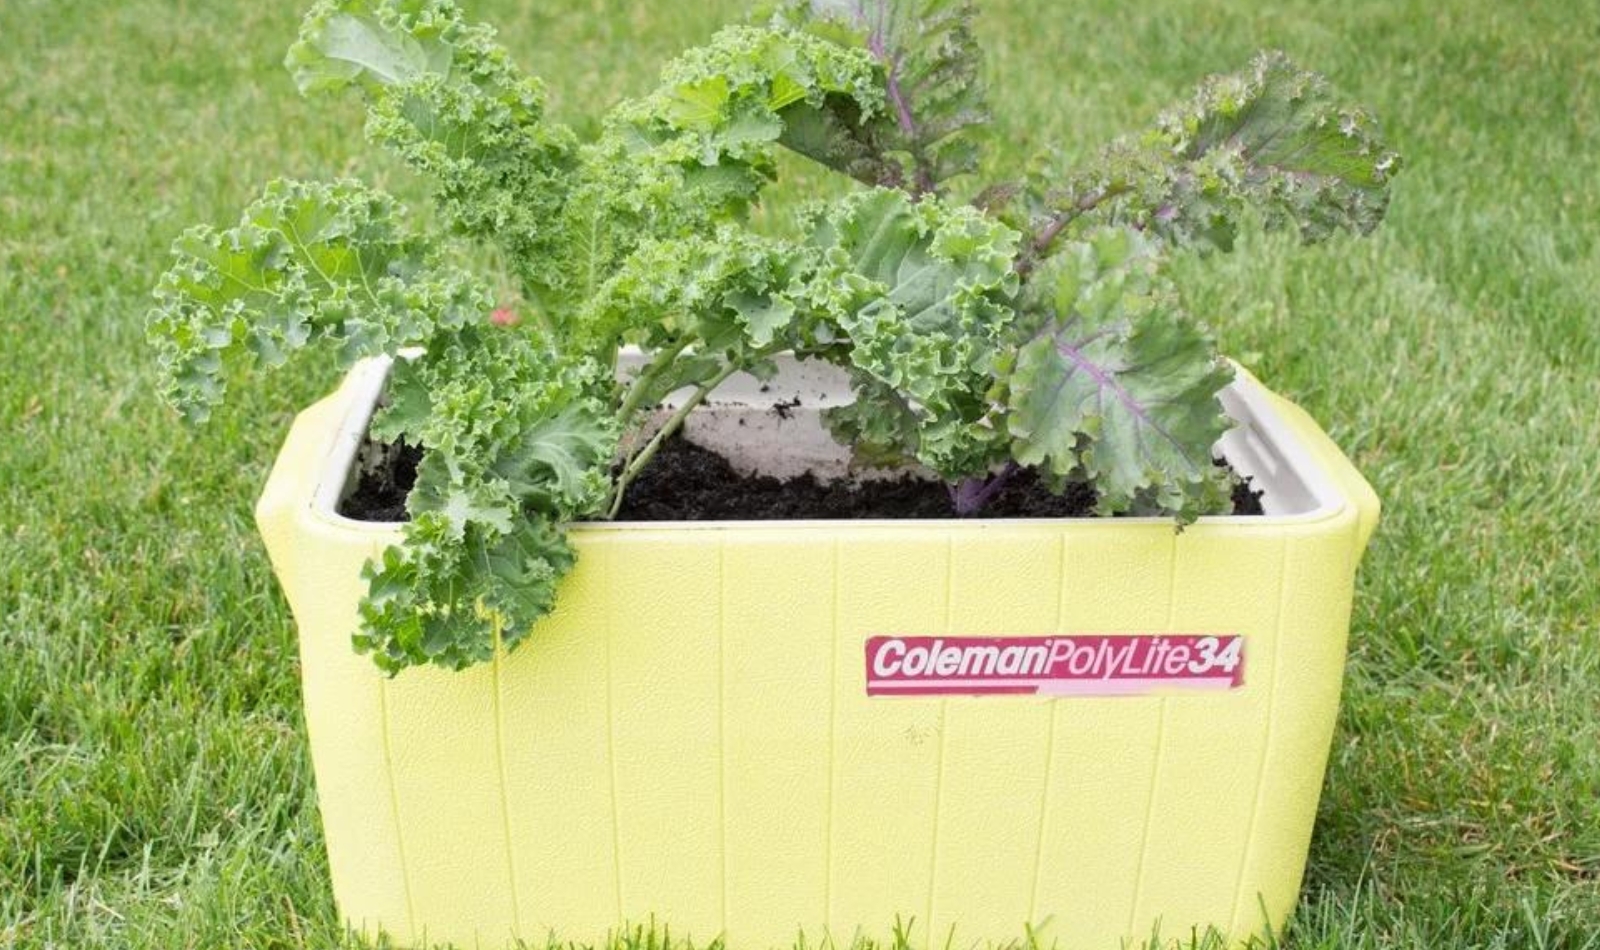 a cooler turned into a planter